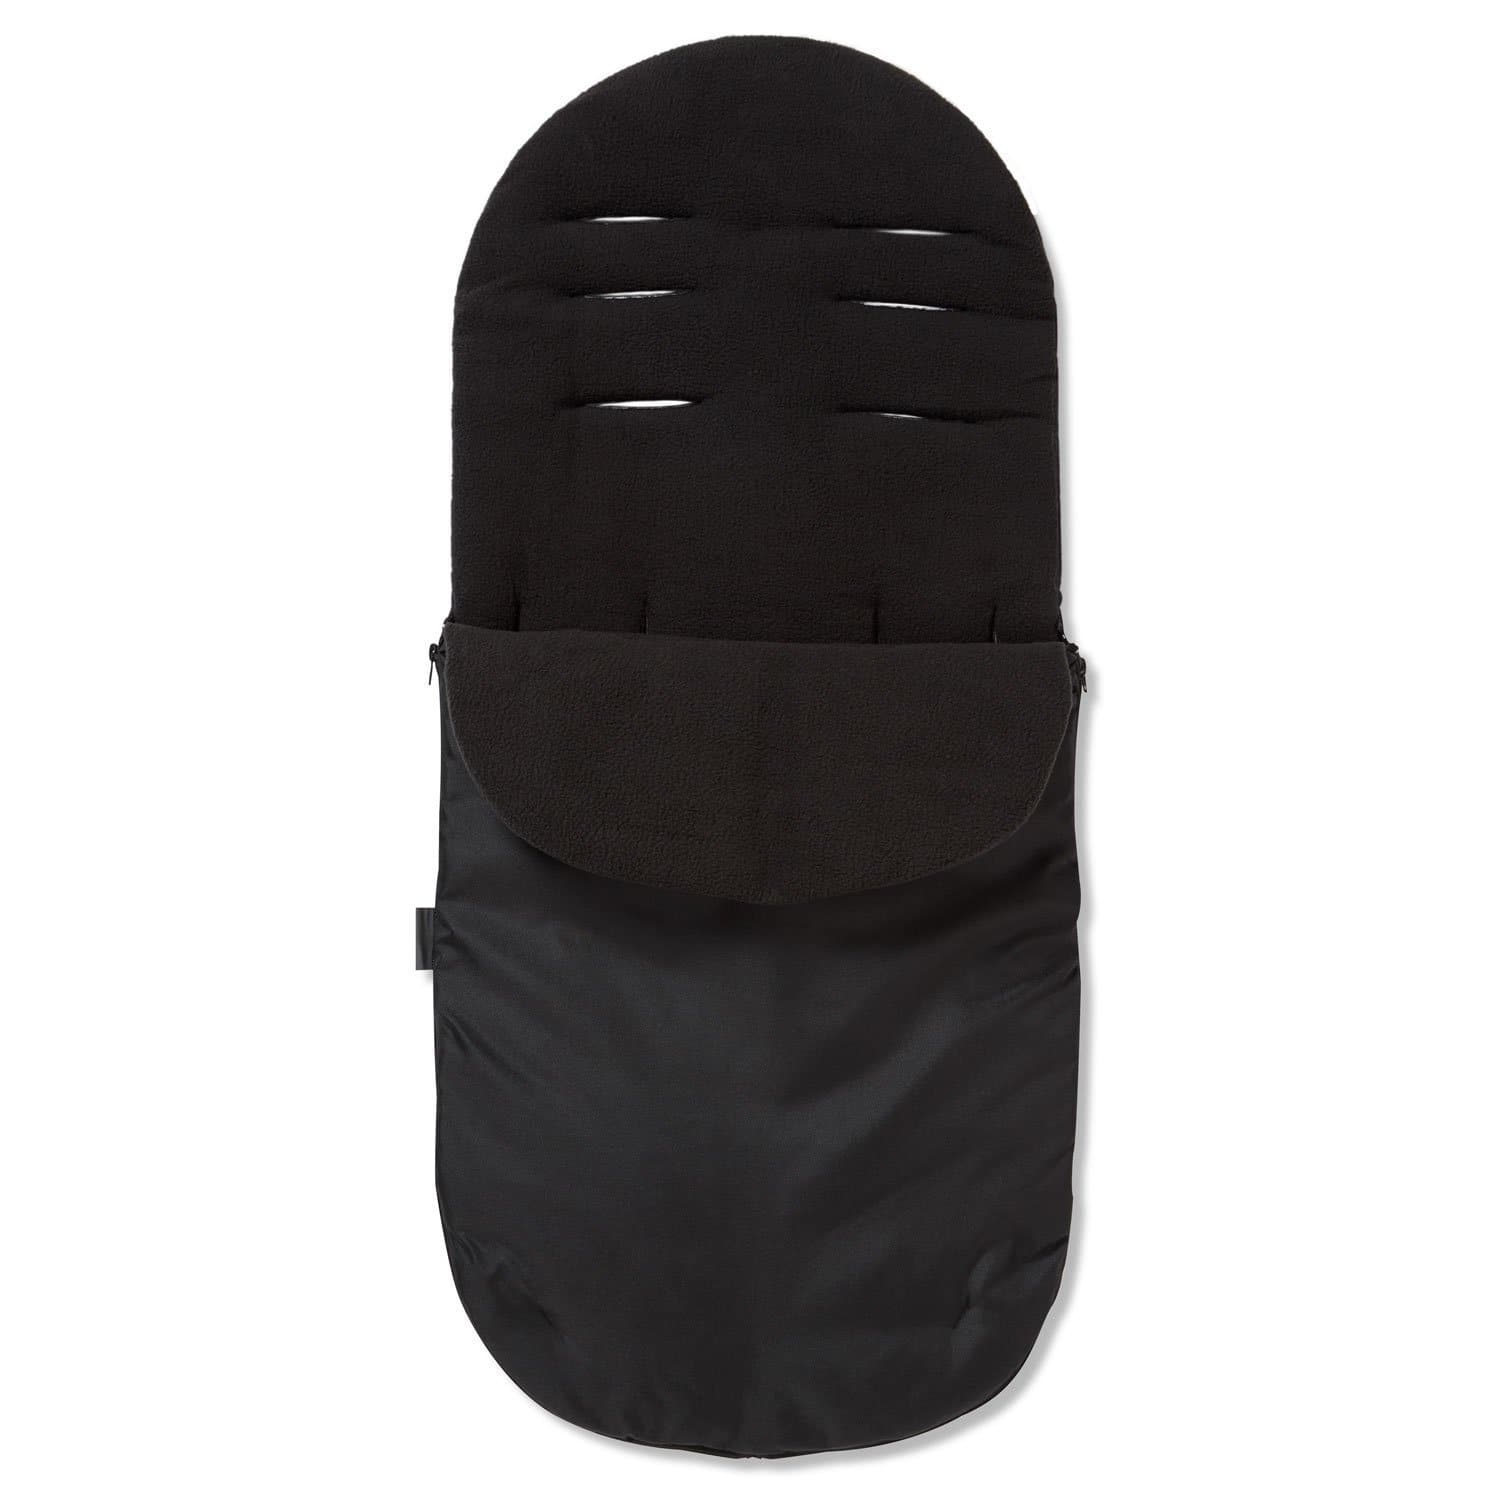 Footmuff / Cosy Toes Compatible with Bloom - Black / Fits All Models | For Your Little One